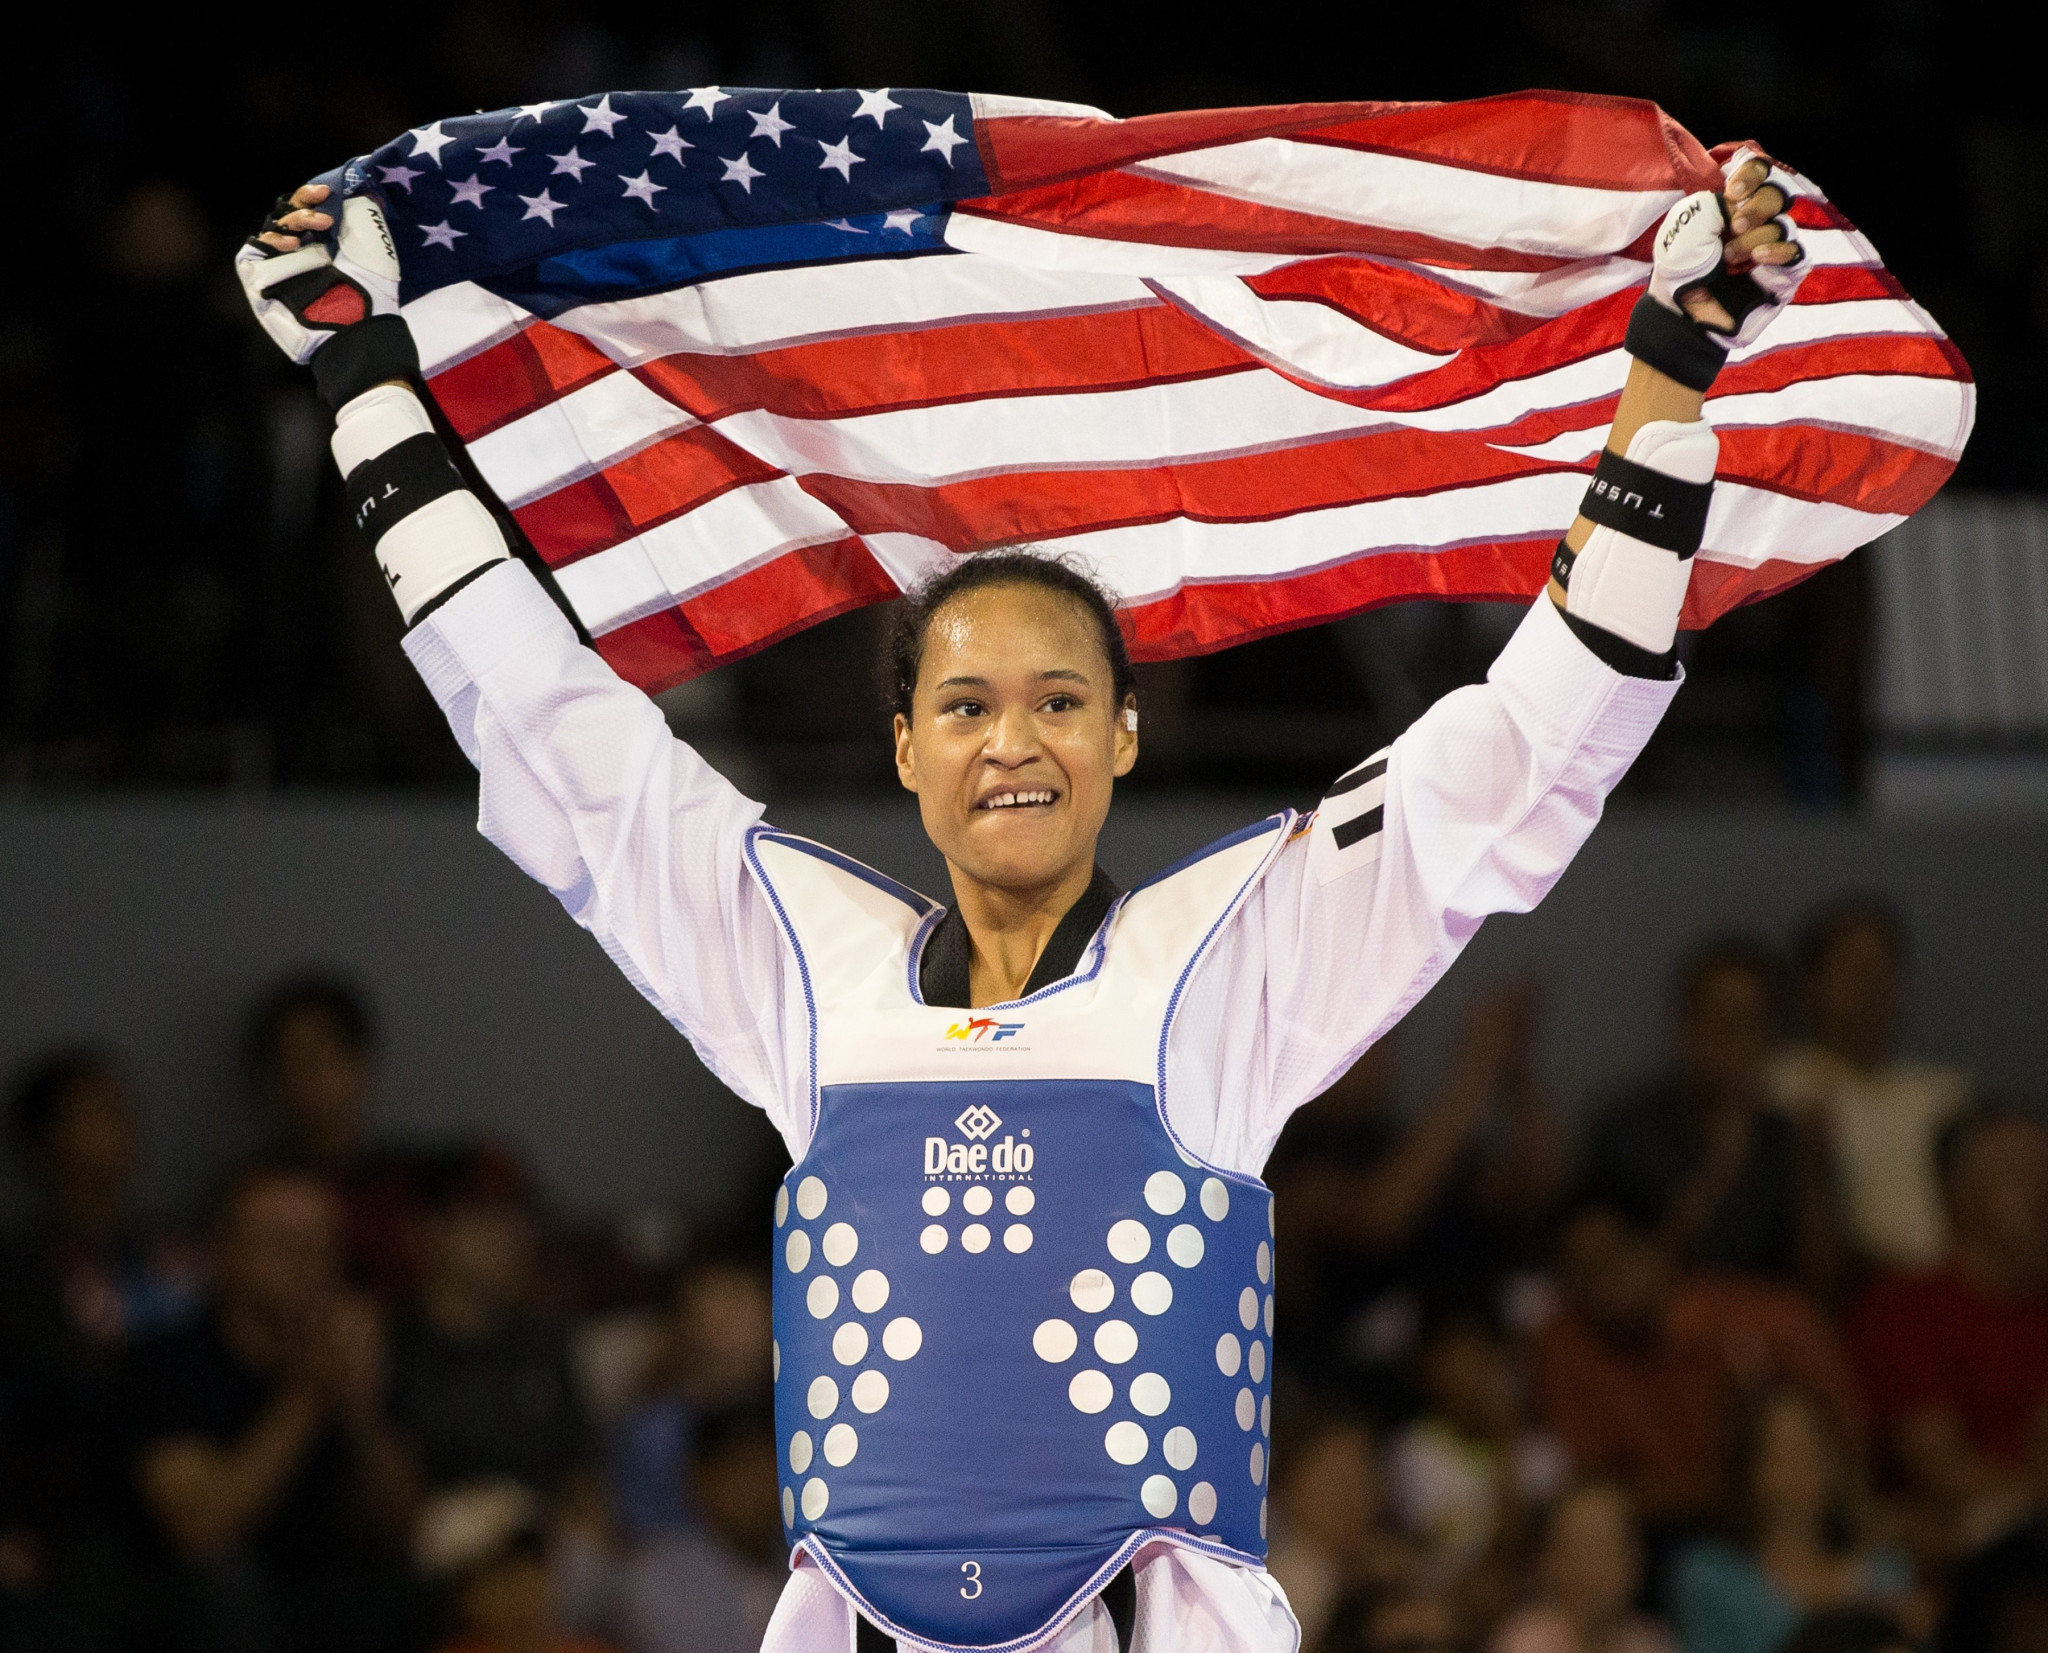 Paige McPherson is one of two American taekwondo qualifiers for Tokyo 2020 ©Getty Images